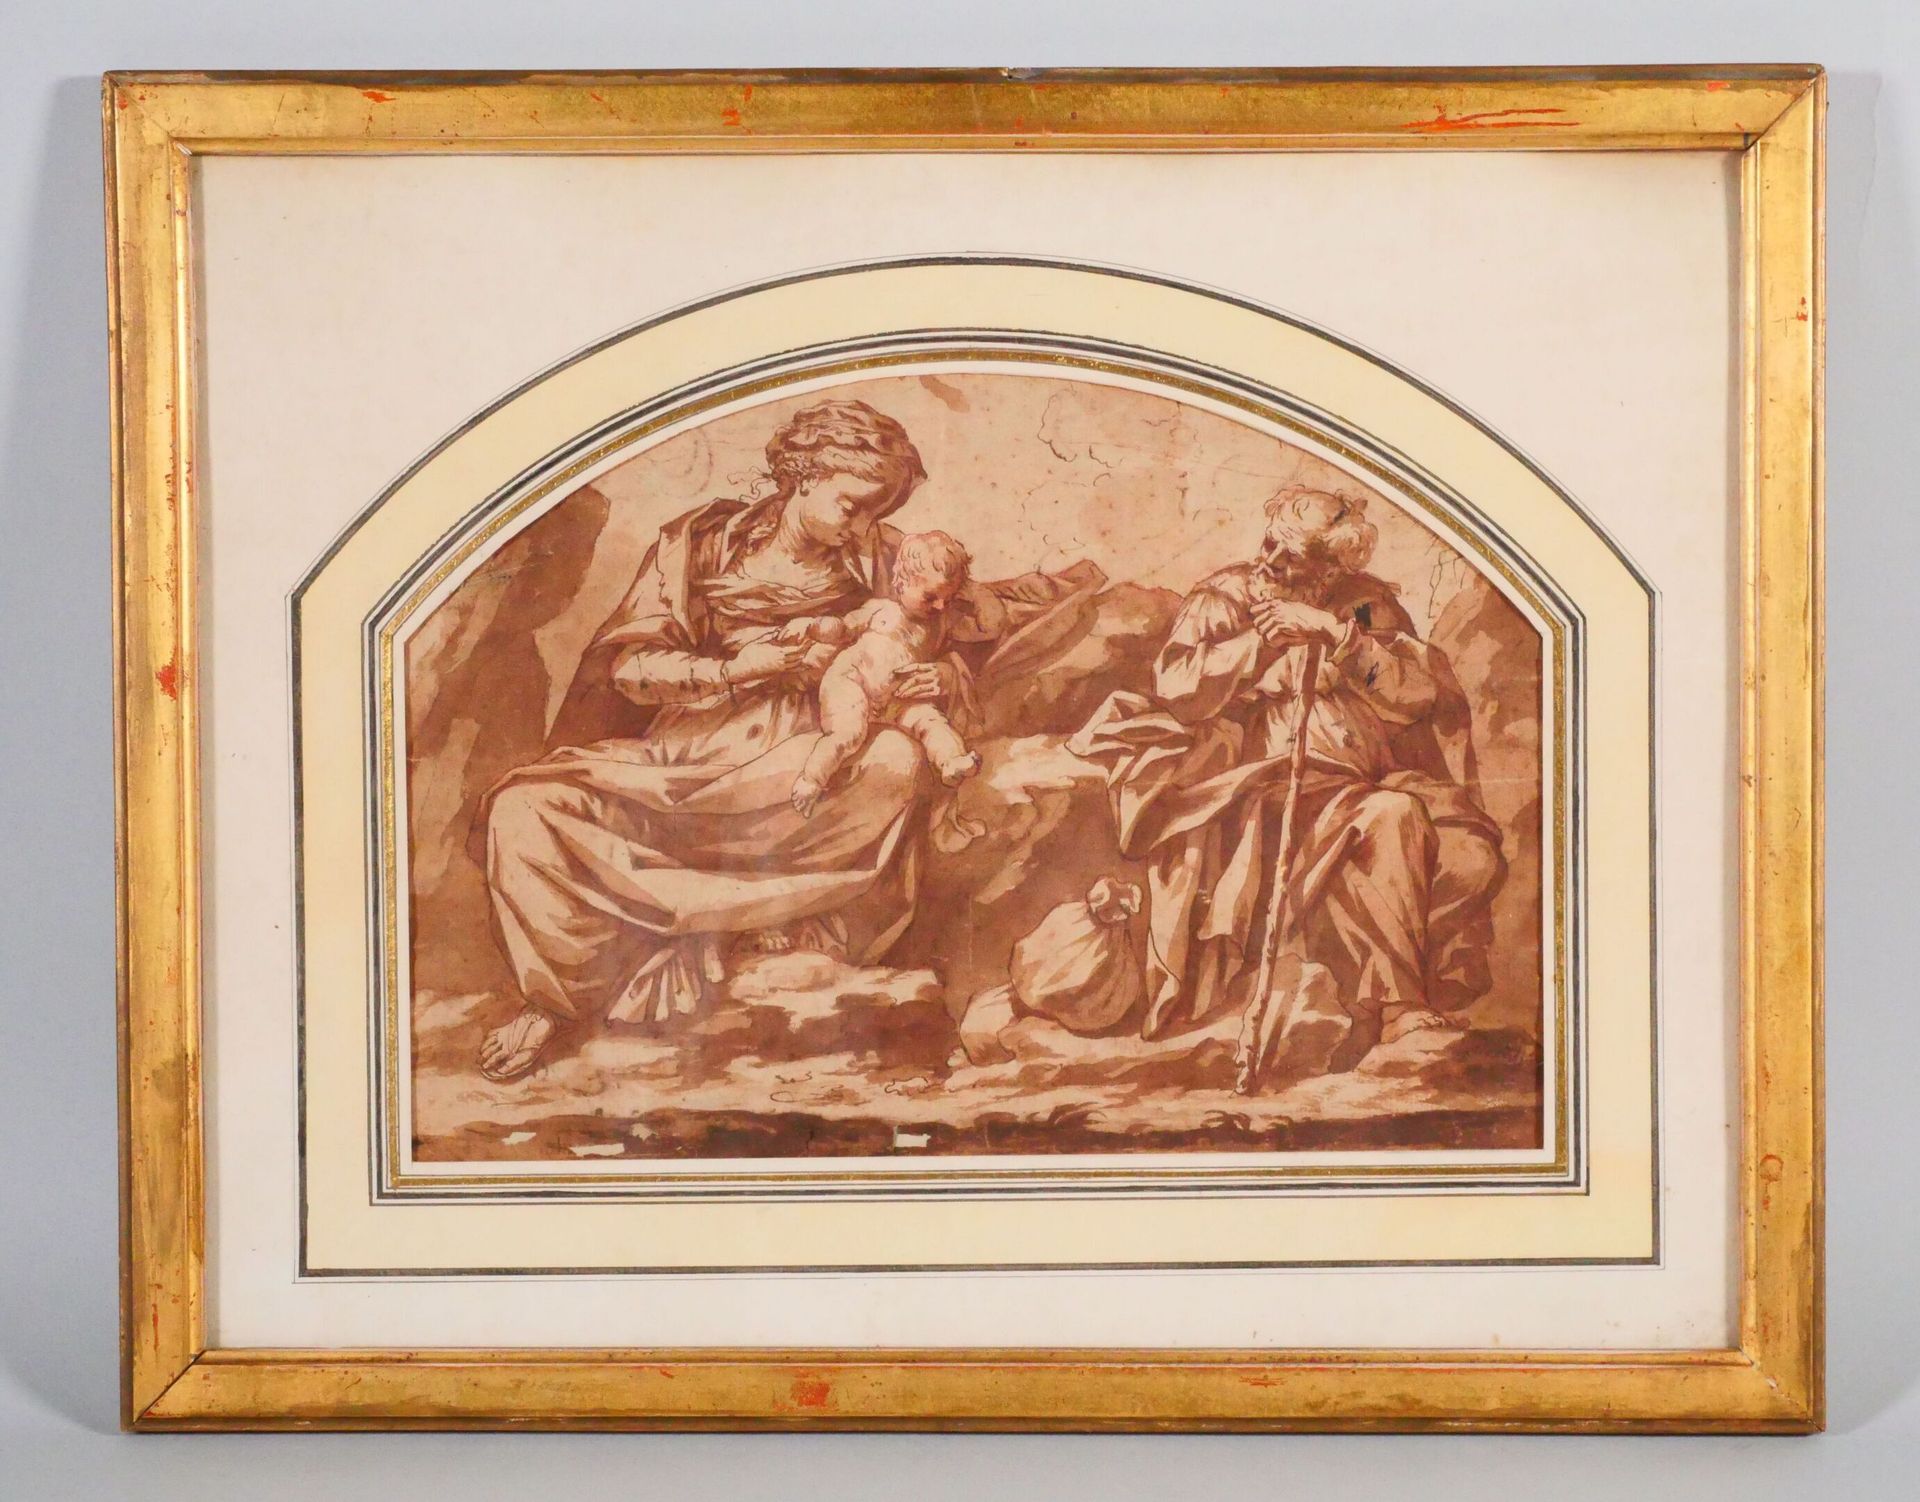 Null Italian school of the 17th century
Resting during the Flight to Egypt, afte&hellip;